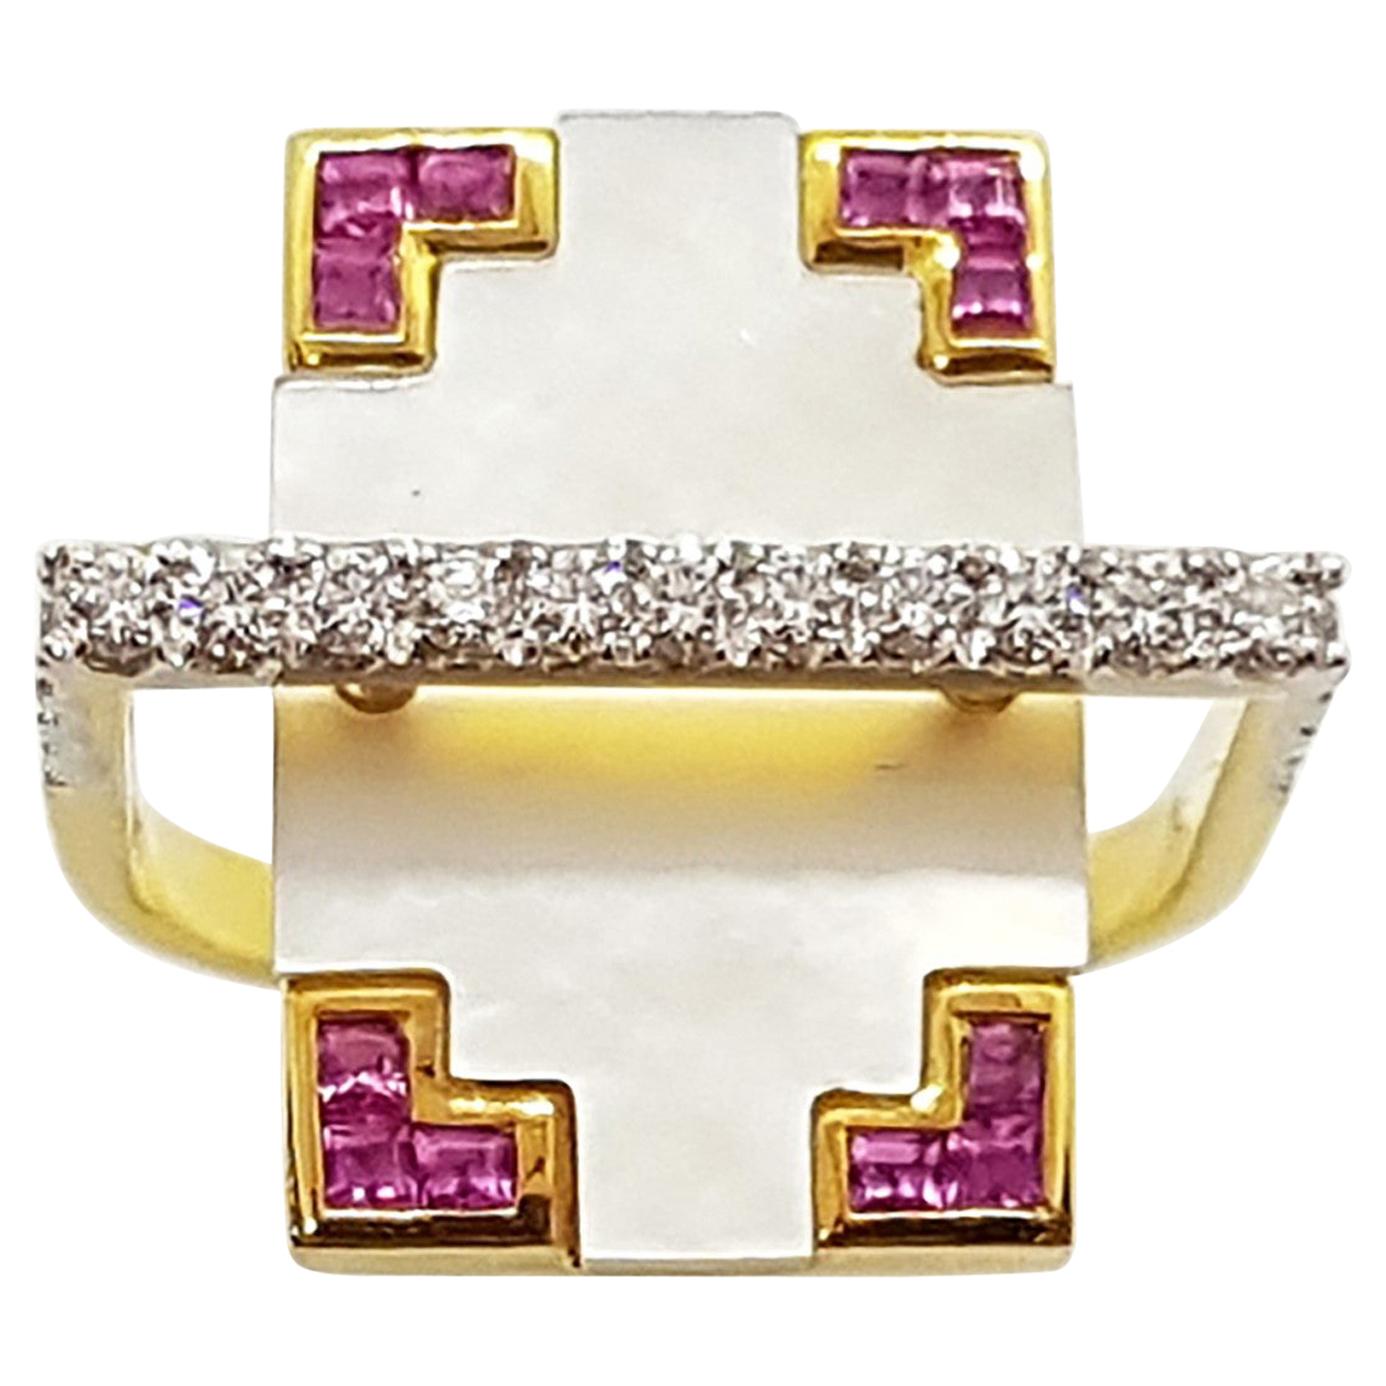 Diamond and Pink Sapphire Ring Set in 18 Karat Gold by Kavant & Sharart